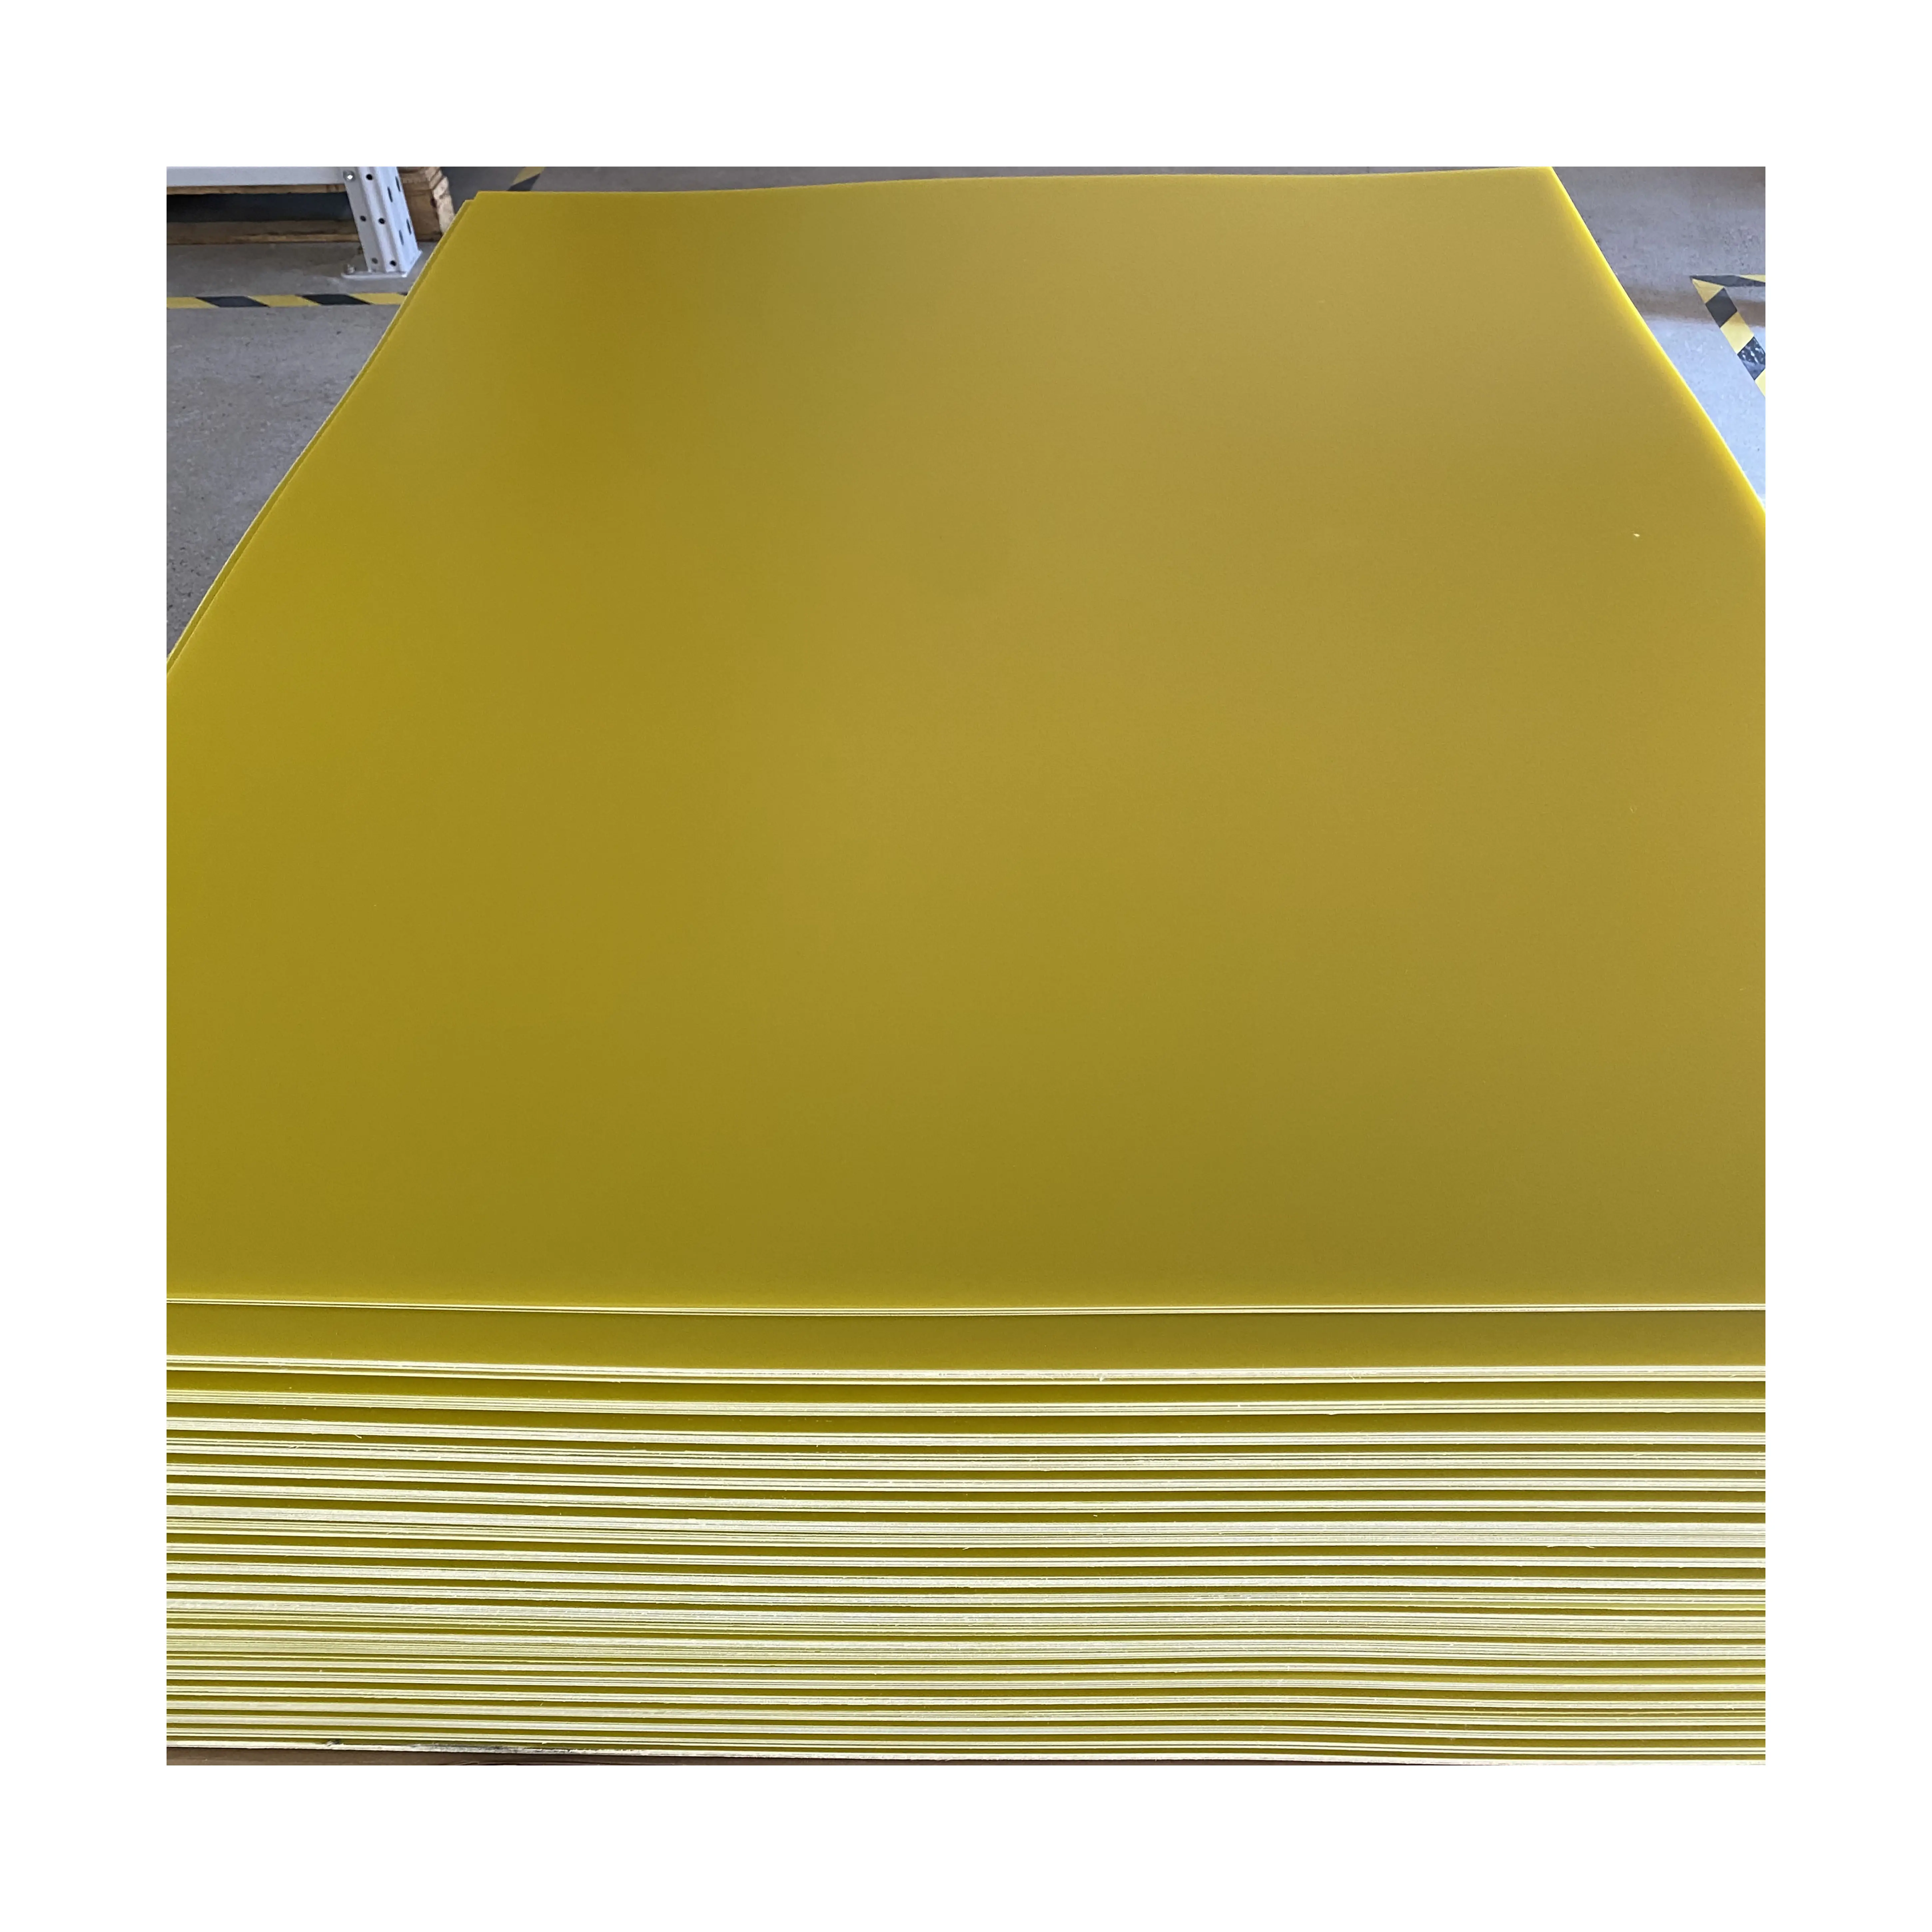 The factory specializes in producing FR4 yellow epoxy resin board 5.0mm and fiberglass board 5.0mm